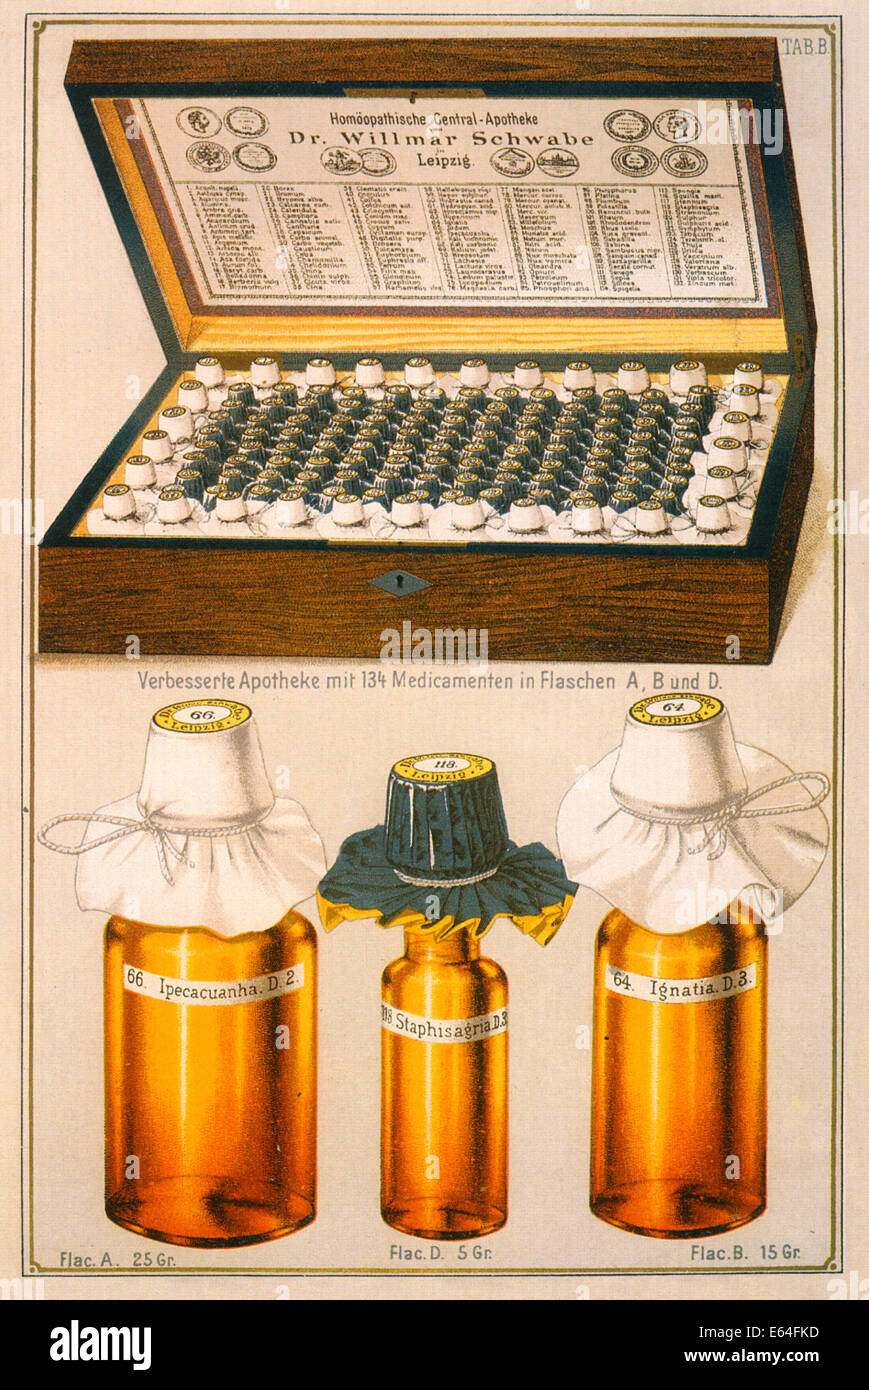 WILHELM SCHWABE (1840-1917) German doctor who founded his homeopathy company in 1886. Advert published in 1889. Stock Photo